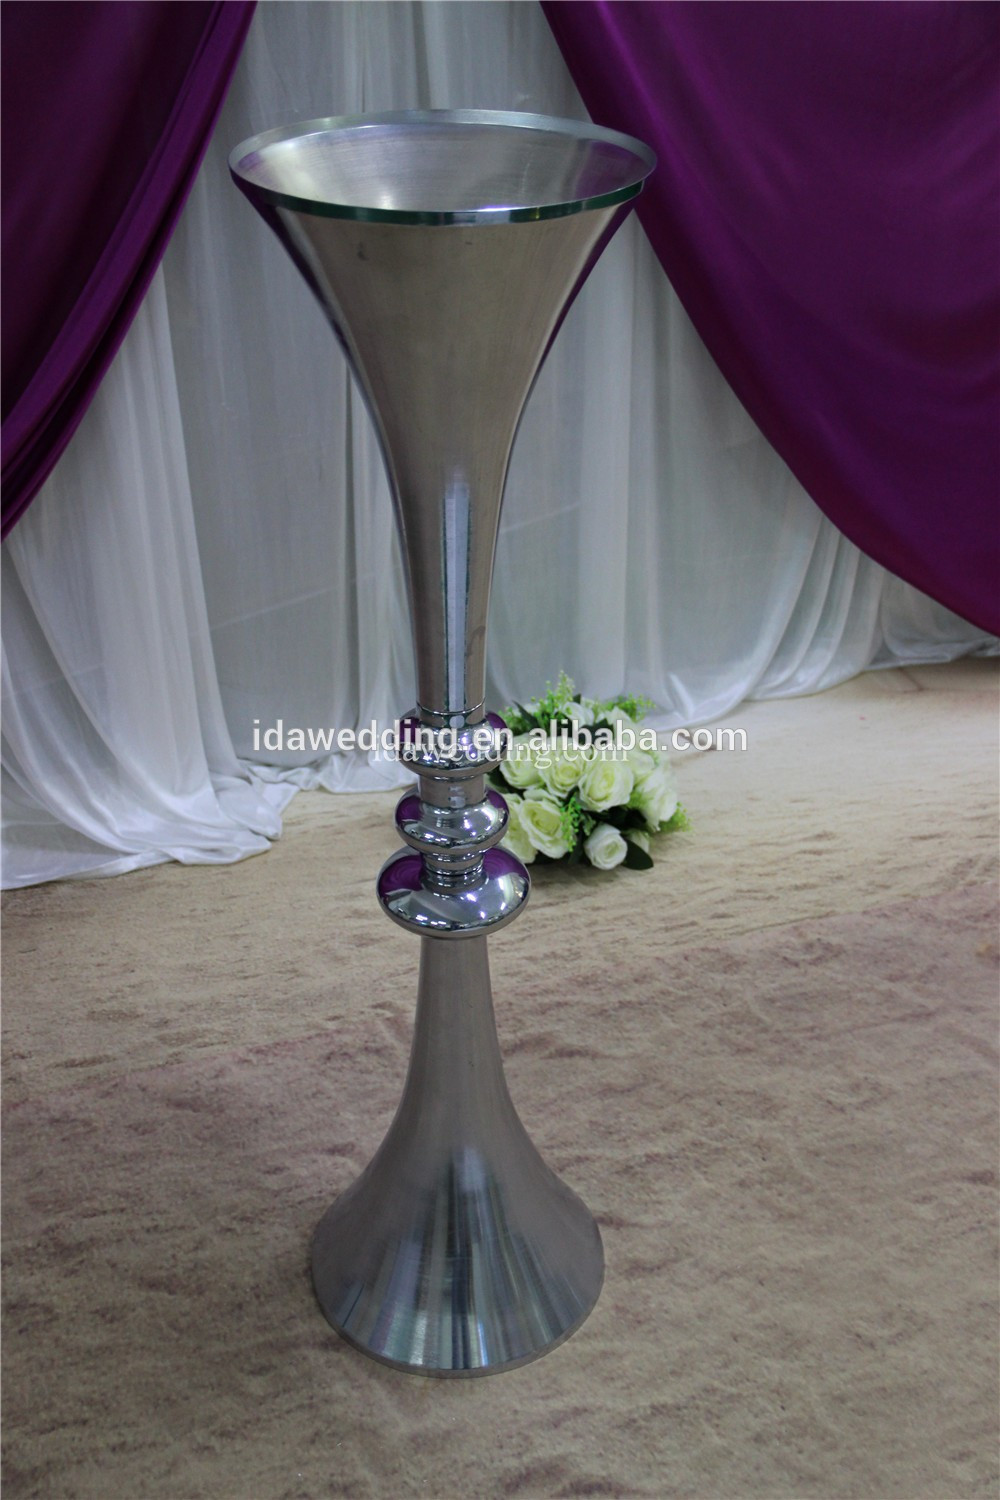 tall glass trumpet vases wholesale of silver vases wholesale pandoraocharms us for silver vases wholesale floor vase trumpet aluminum